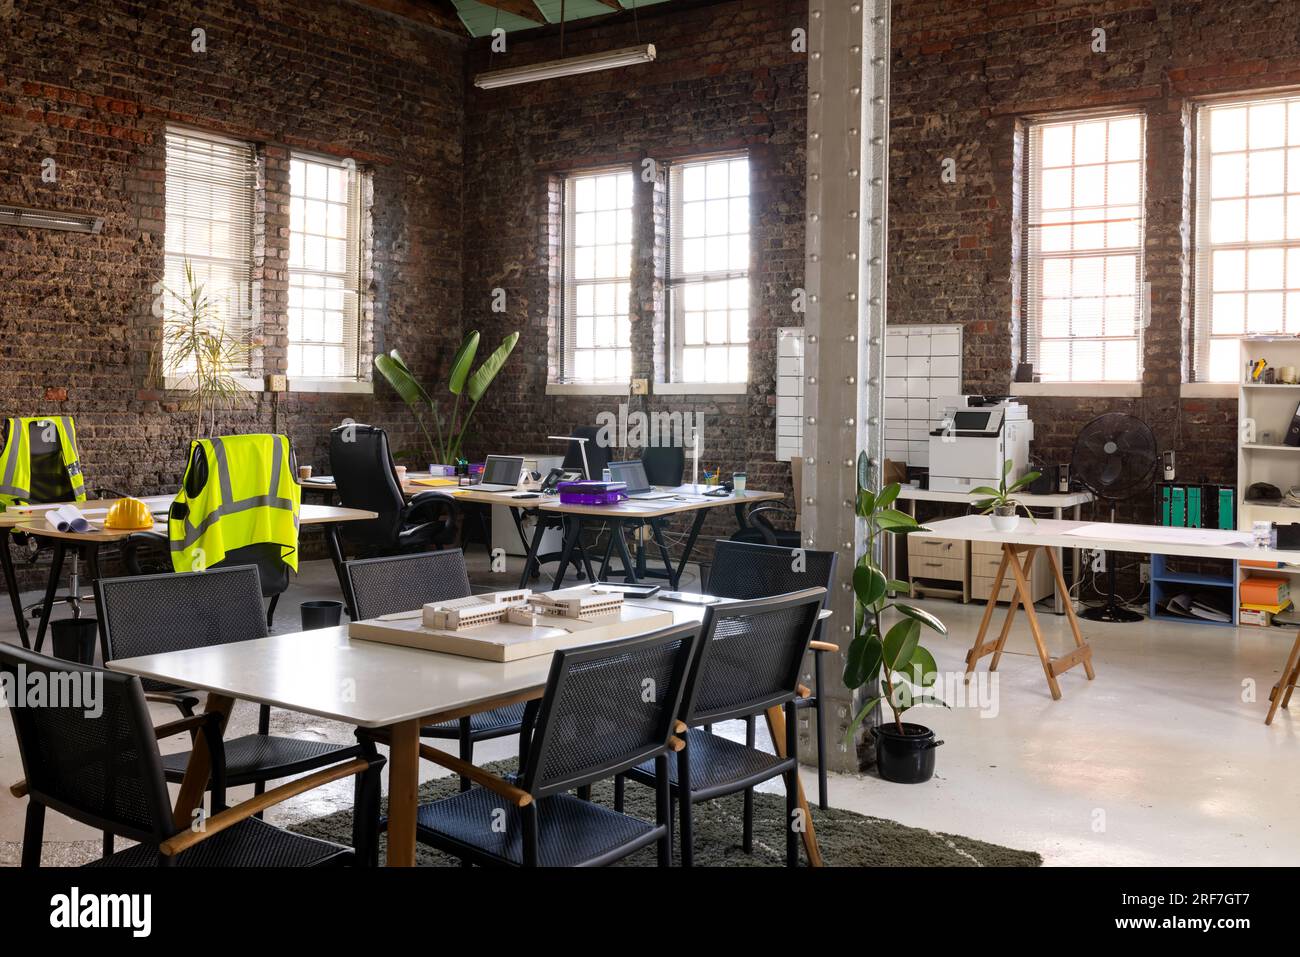 Modern creative office interior with exposed brick walls, desks and chairs Stock Photo